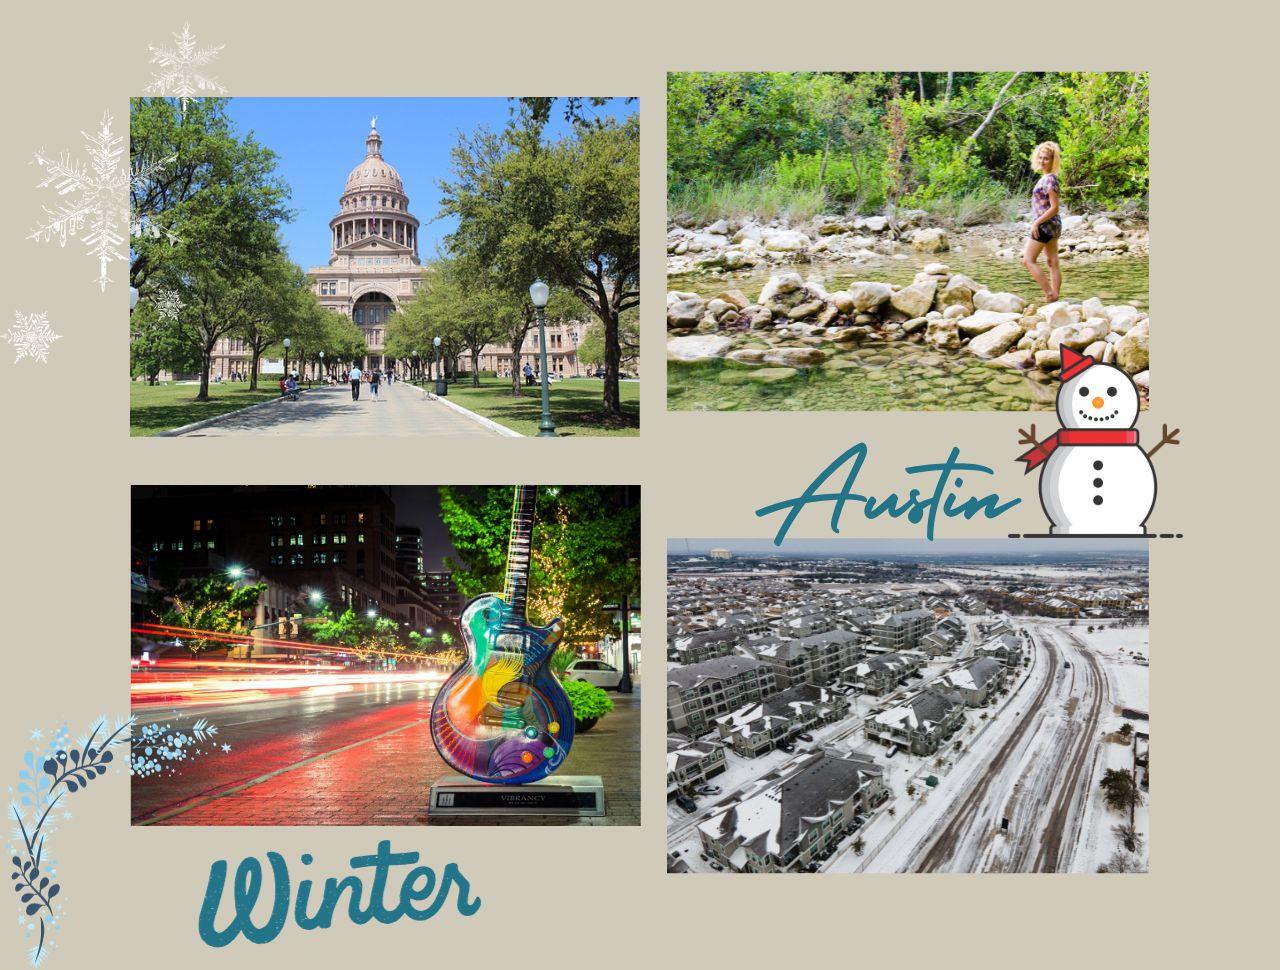 Top 6 Free Things To Do in Austin This Winter: Save Money and Have Fun